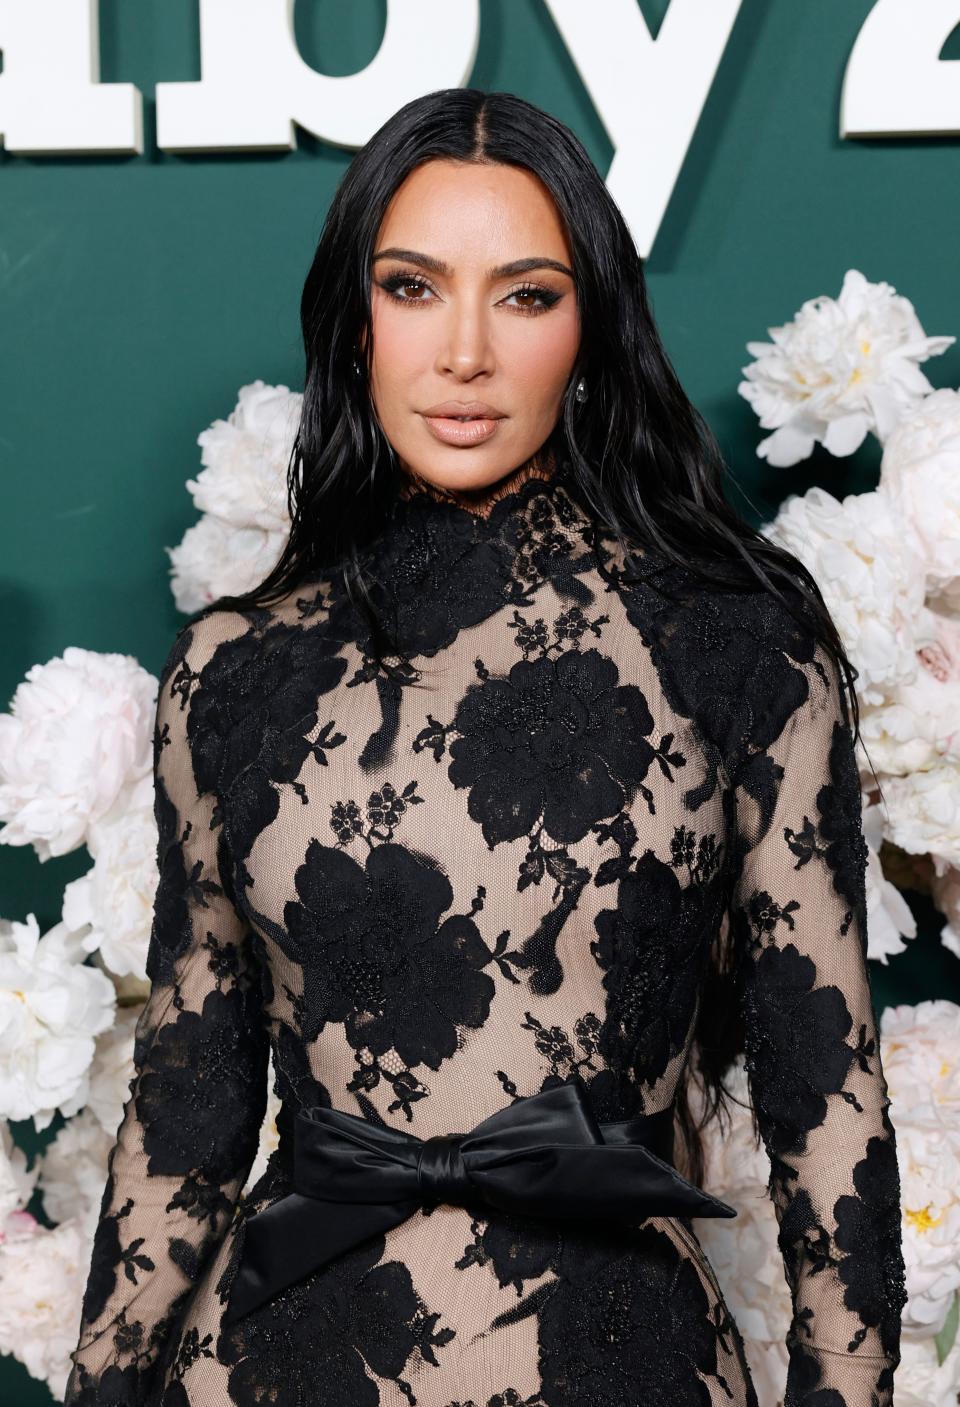 WEST HOLLYWOOD, CALIFORNIA - NOVEMBER 11: Kim Kardashian attends 2023 Baby2Baby Gala Presented By Paul Mitchell at Pacific Design Center on November 11, 2023 in West Hollywood, California. (Photo by Stefanie Keenan/Getty Images for Baby2Baby)